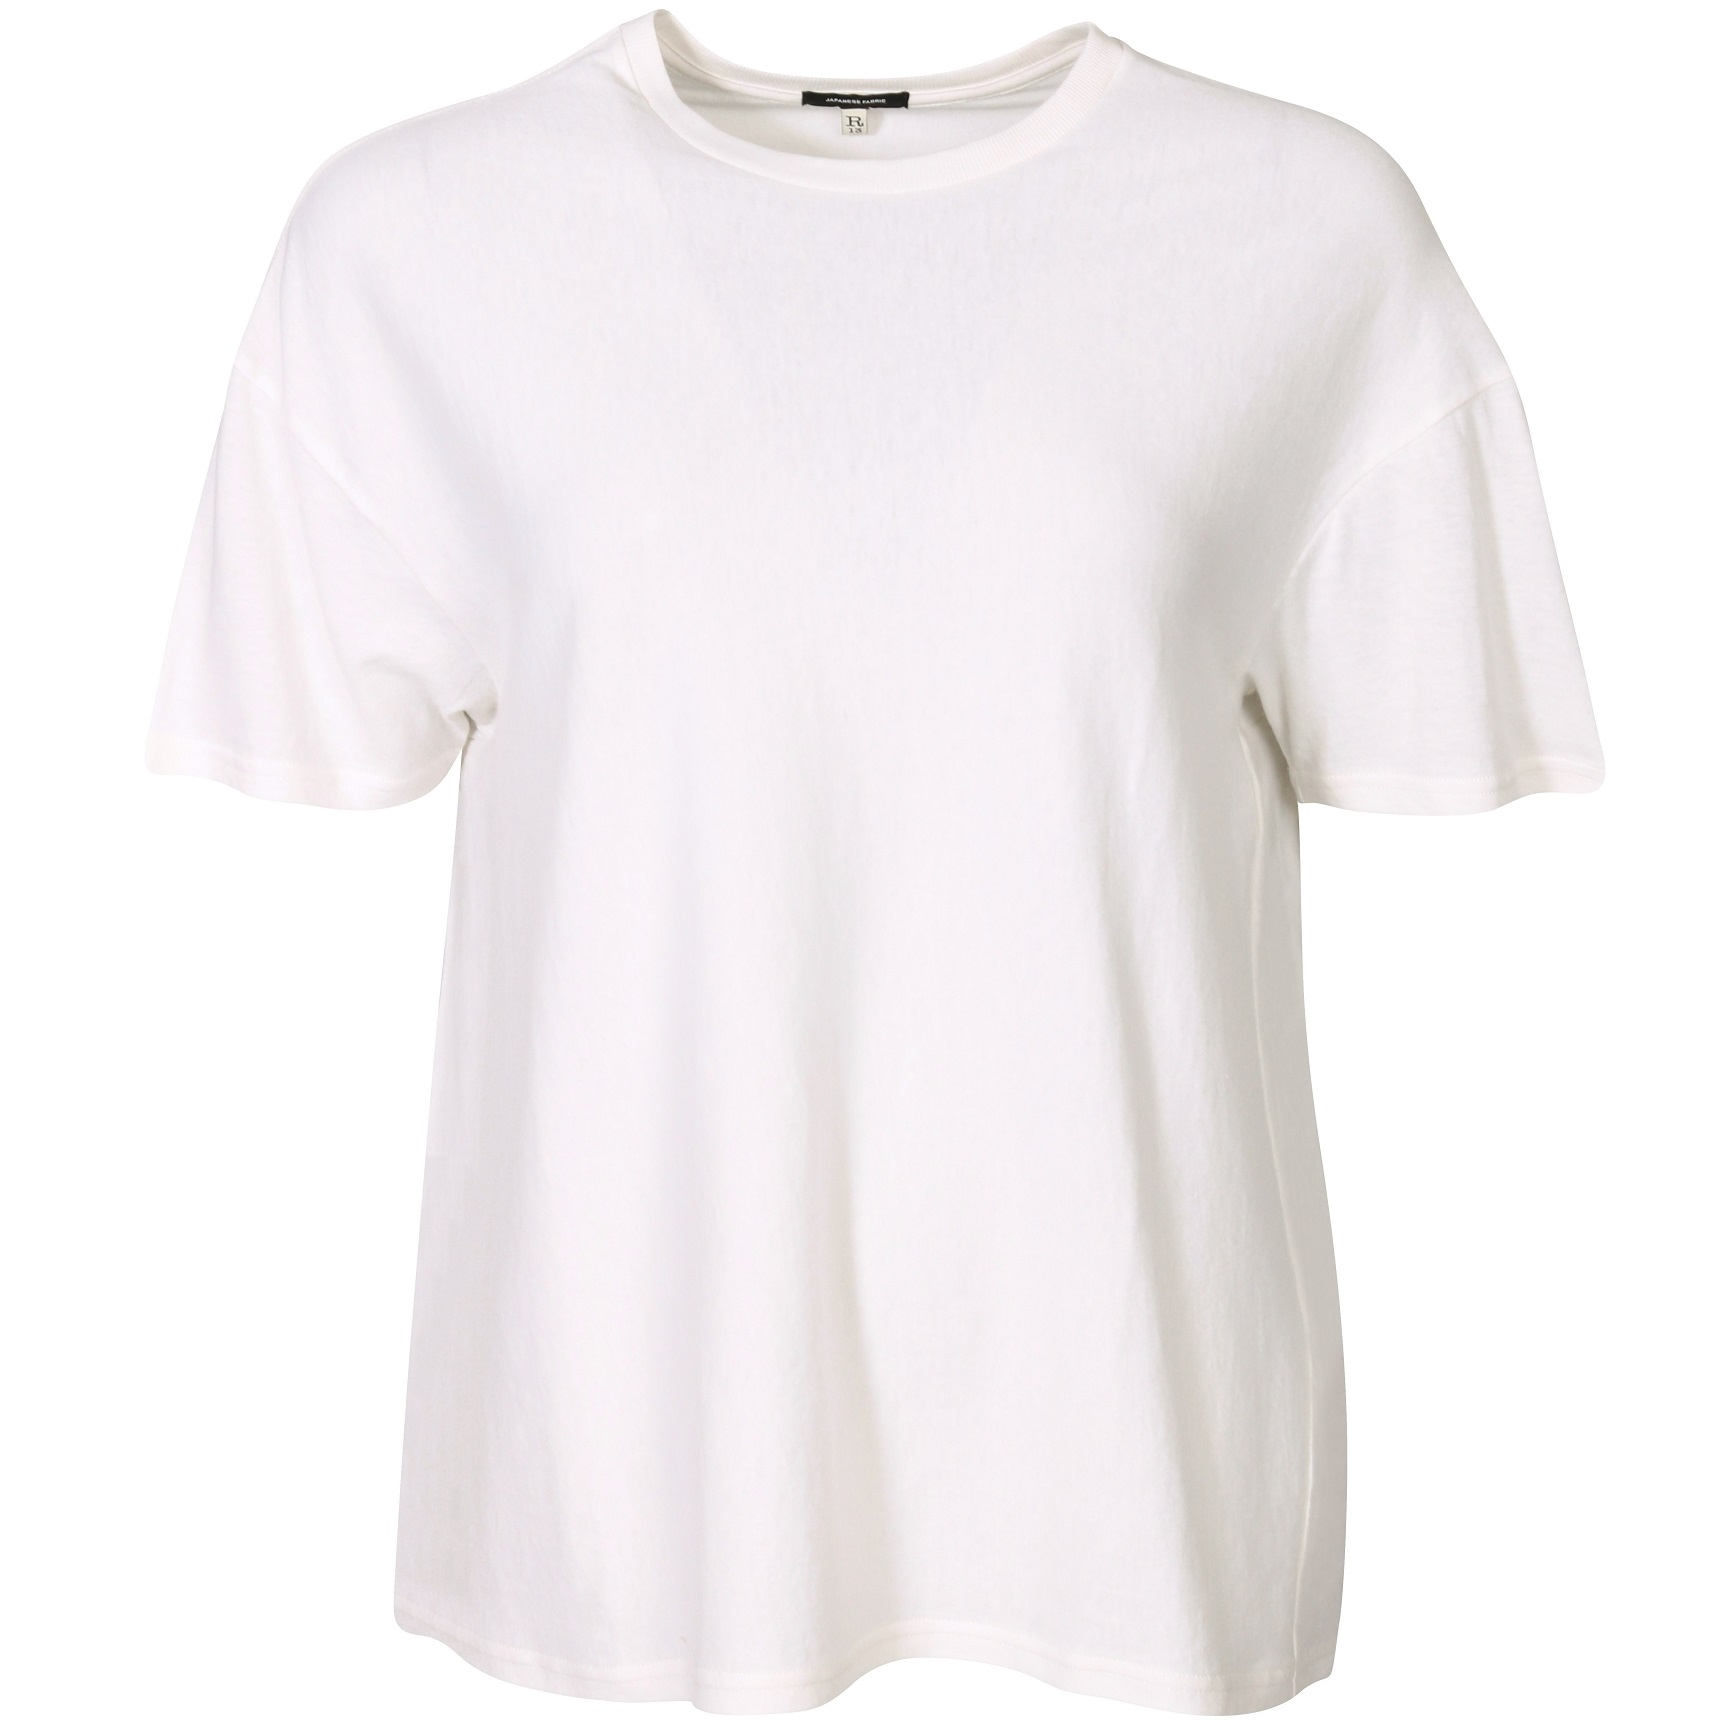 R13 Boxy Seamless T-Shirt in White M